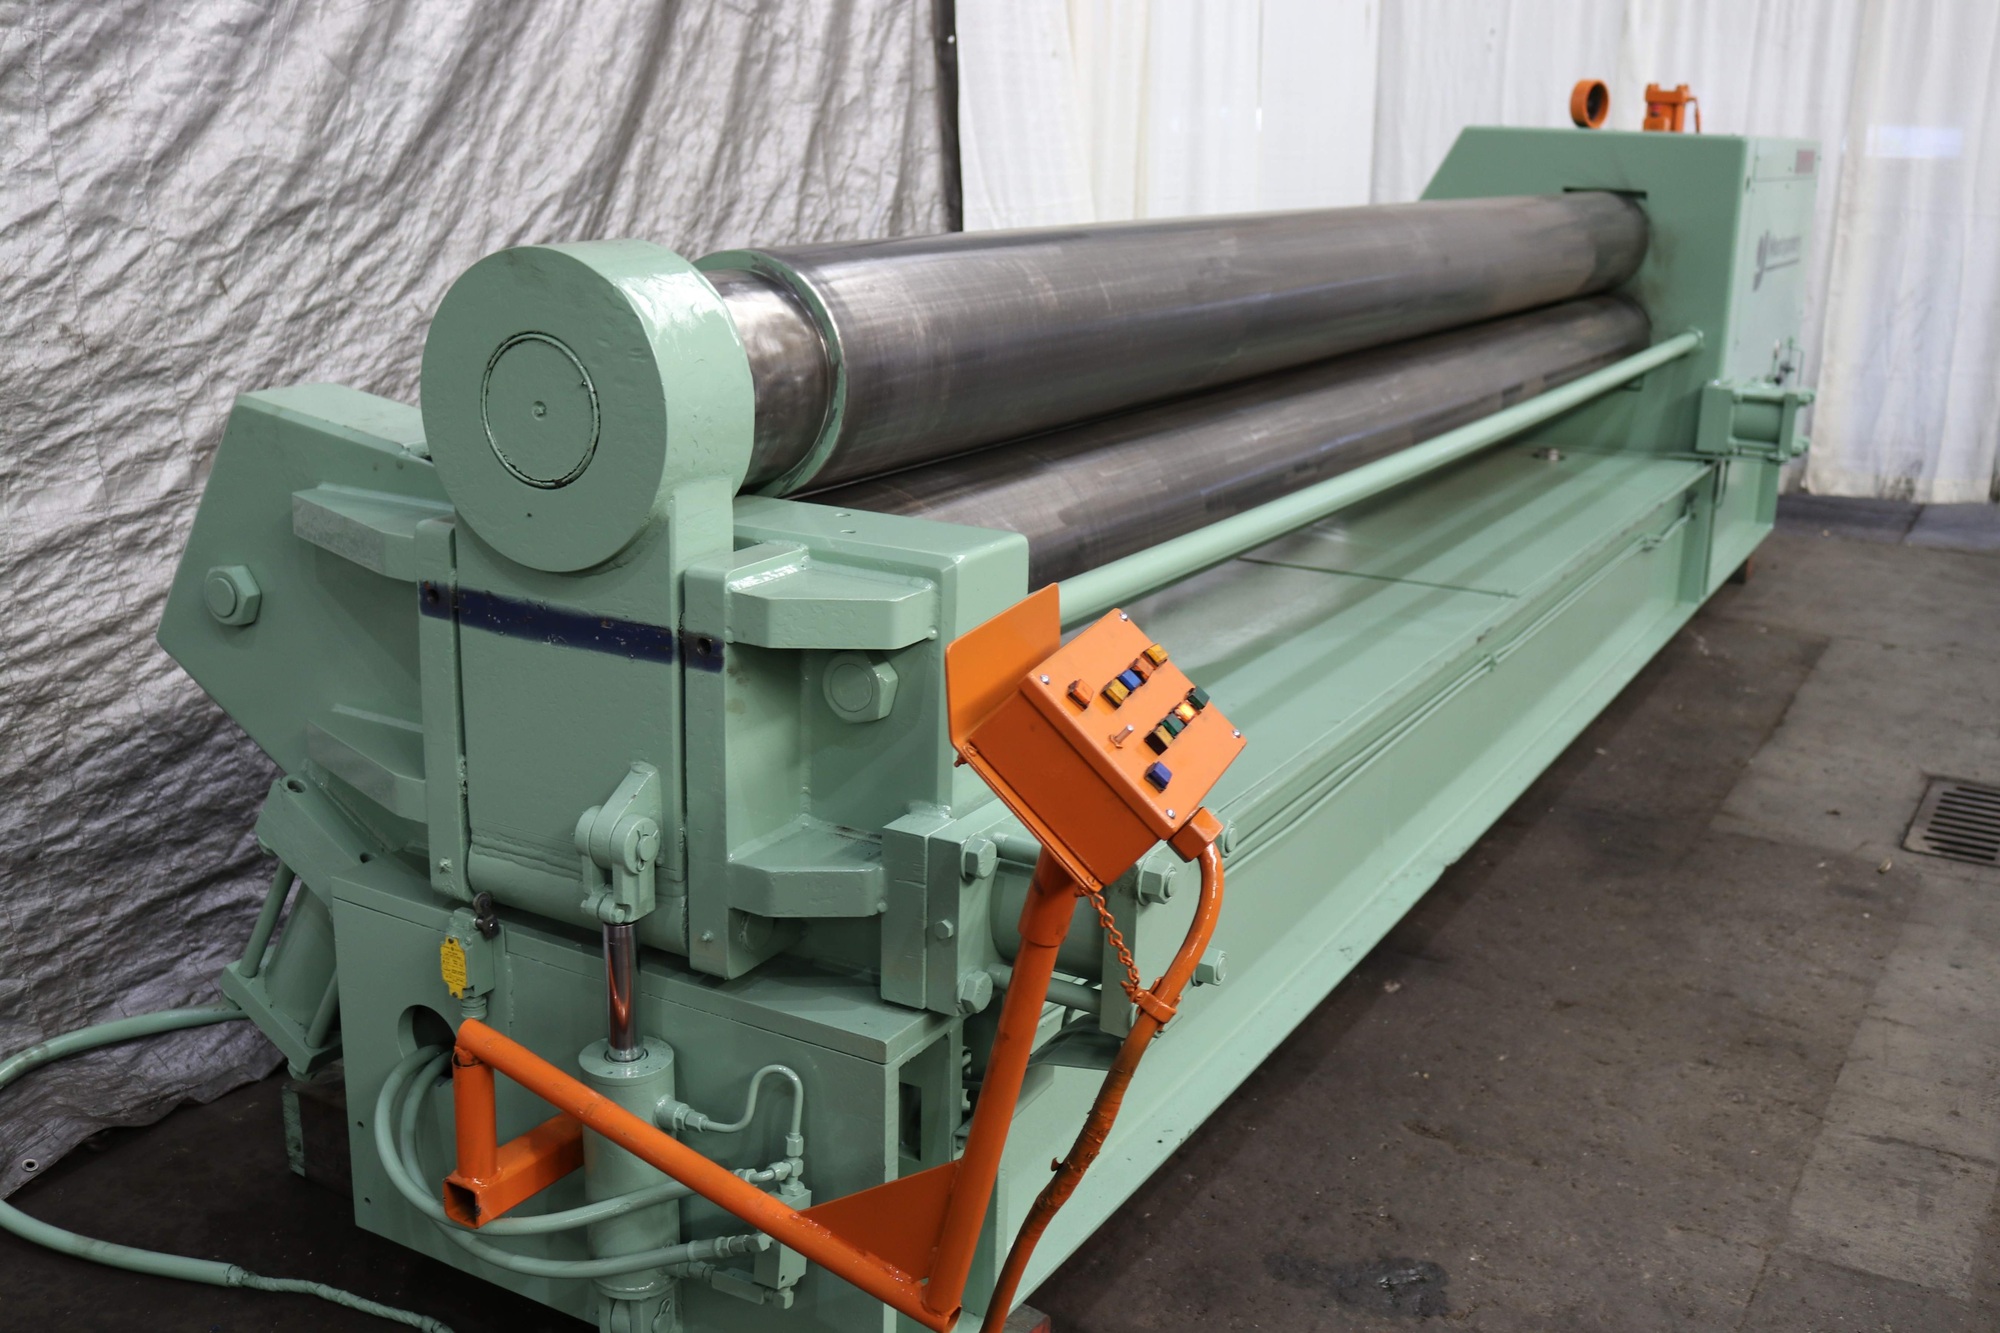 MONTGOMERY 16825H ROLLS, PLATE BENDING | Strand Industrial Machinery Co.